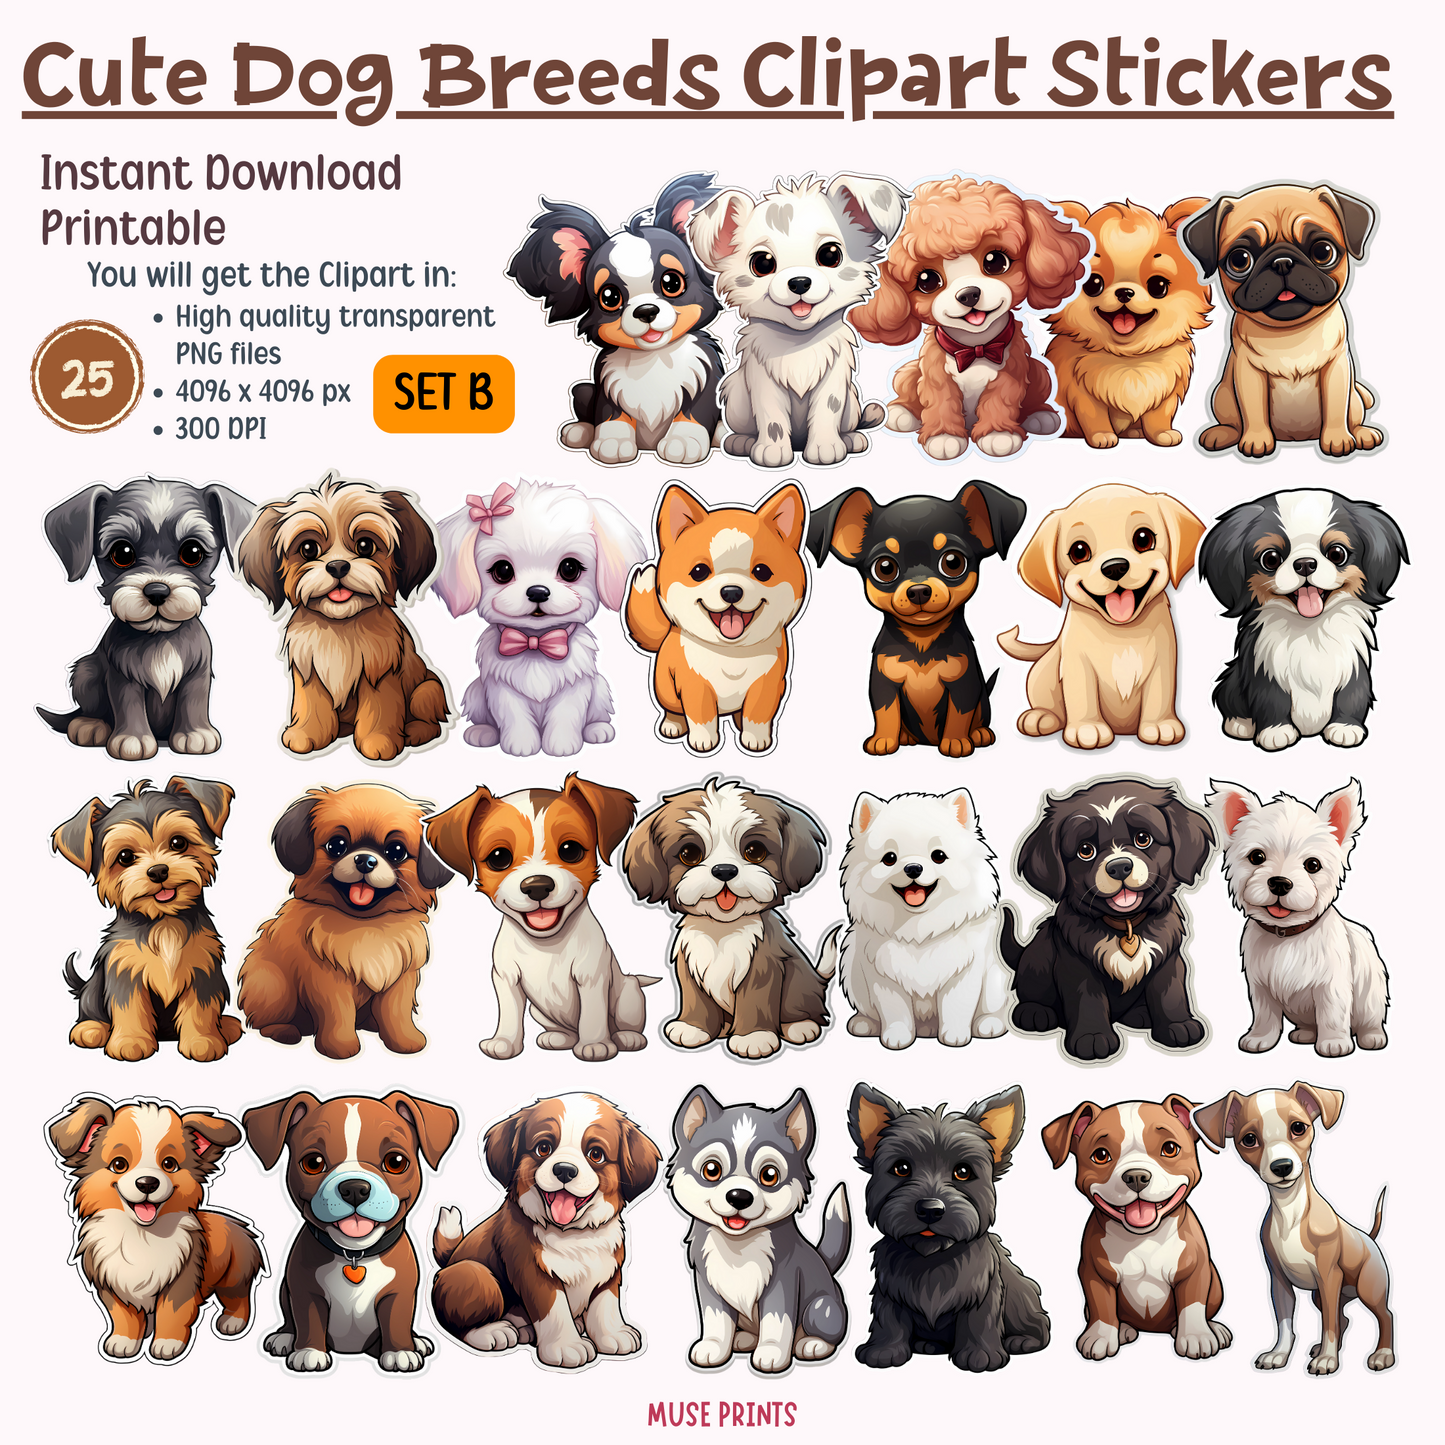 Charming Canines: Dog Breeds Clipart Stickers - Set B